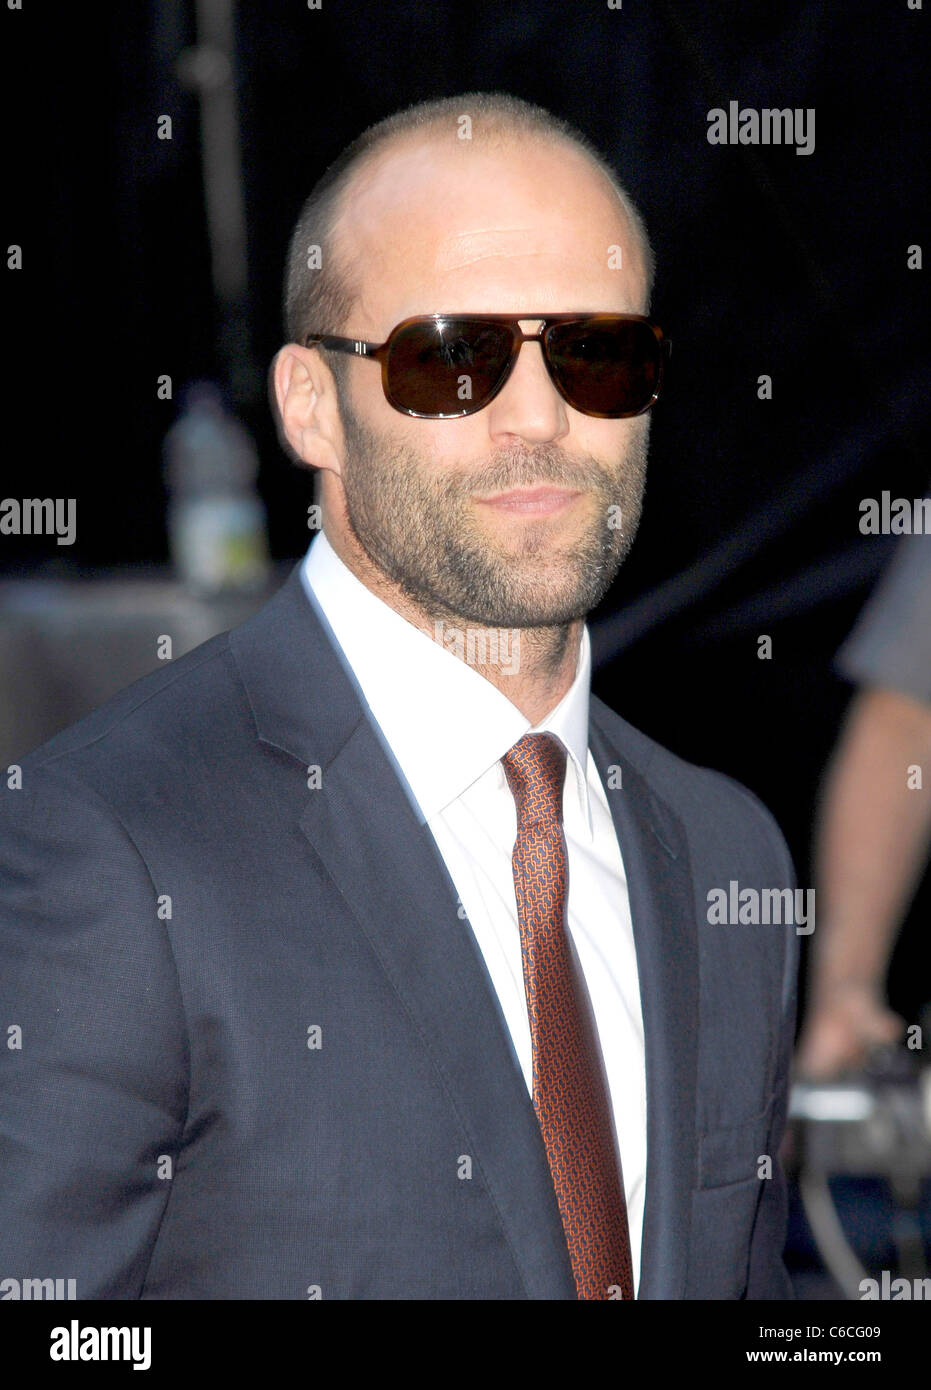 Jason Statham The Expendables - UK film premiere held at the Odeon ...